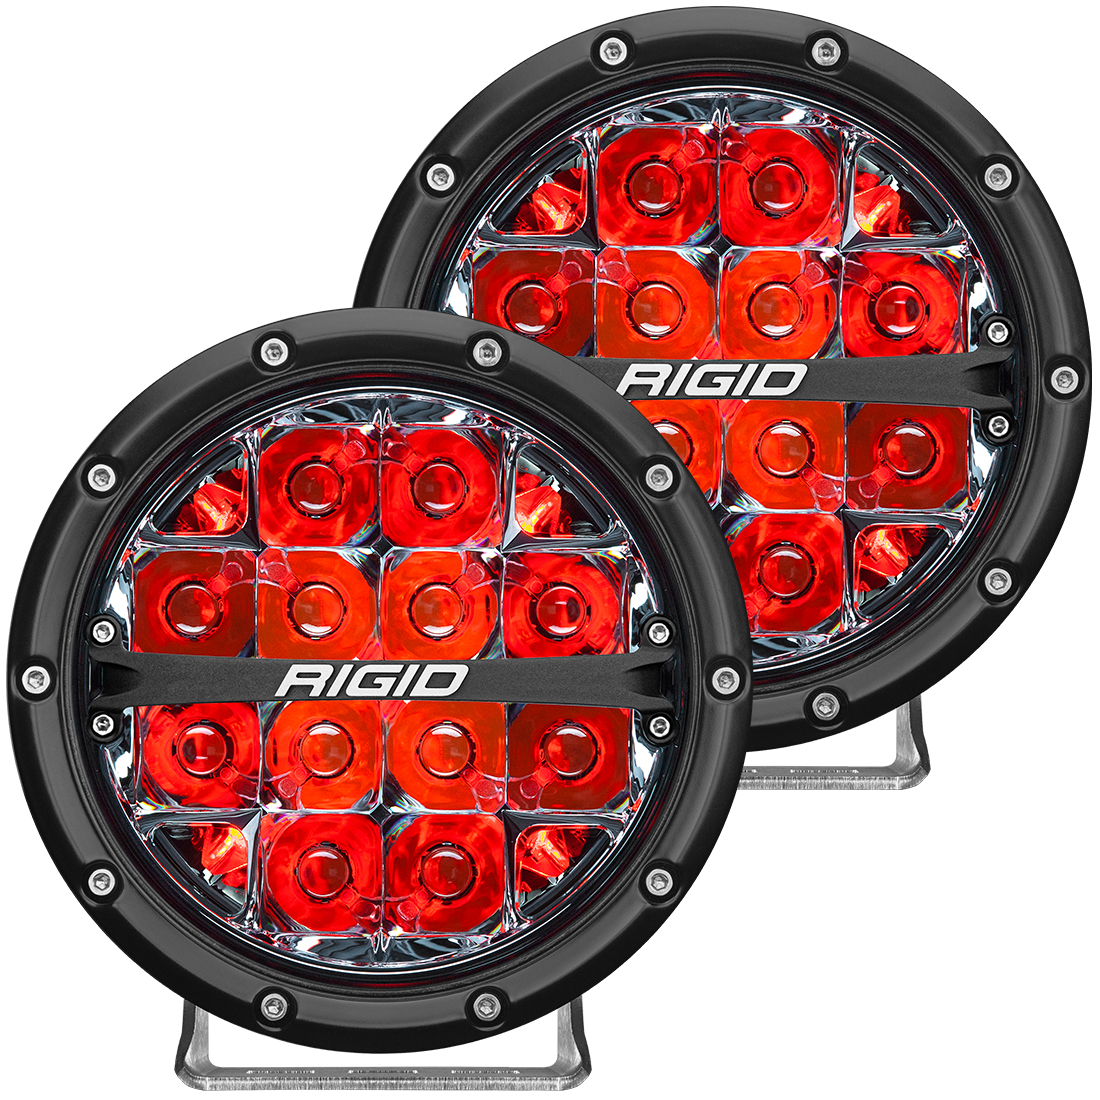 Rigid Industries 360-Series 6 Inch Led Off-Road Spot Beam Red Backlight Pair